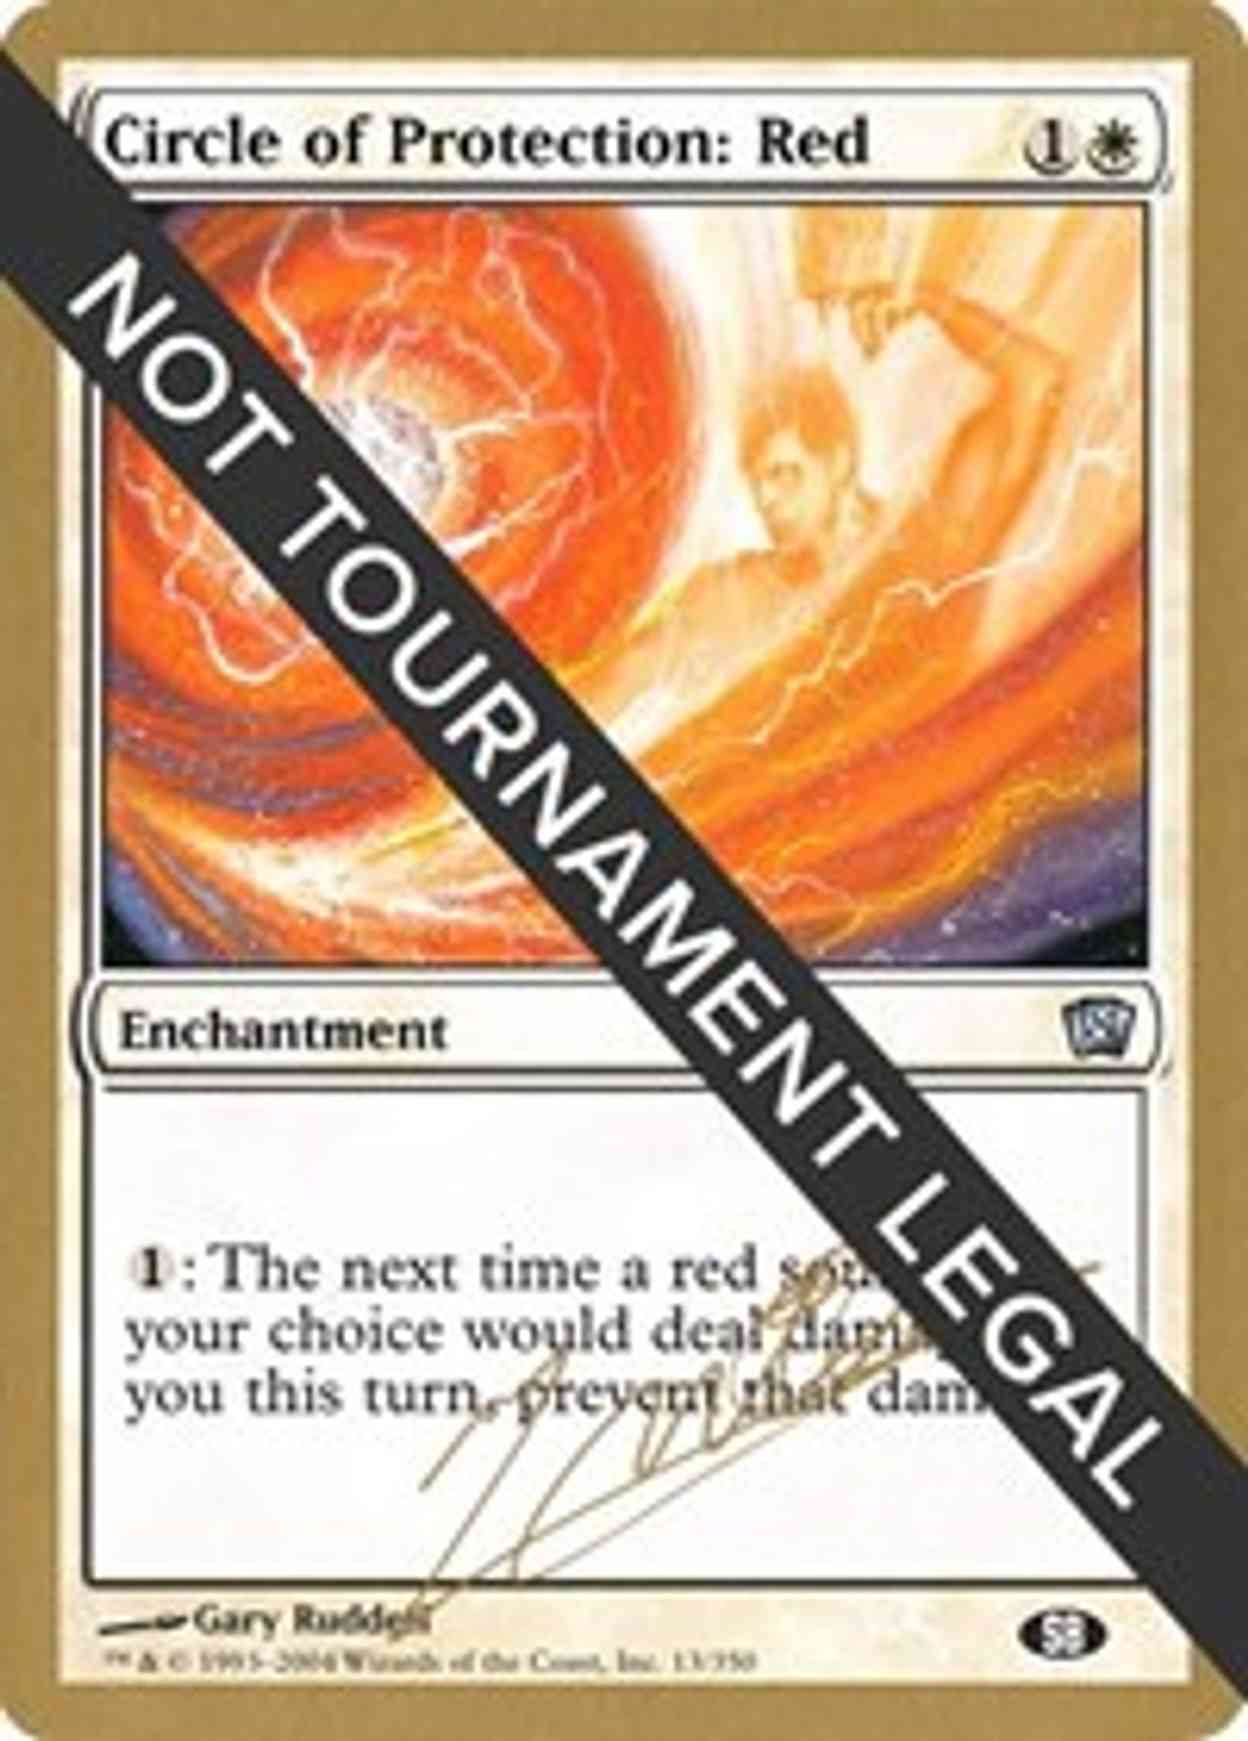 Circle of Protection: Red - 2004 Julien Nuijten (8ED) (SB) magic card front